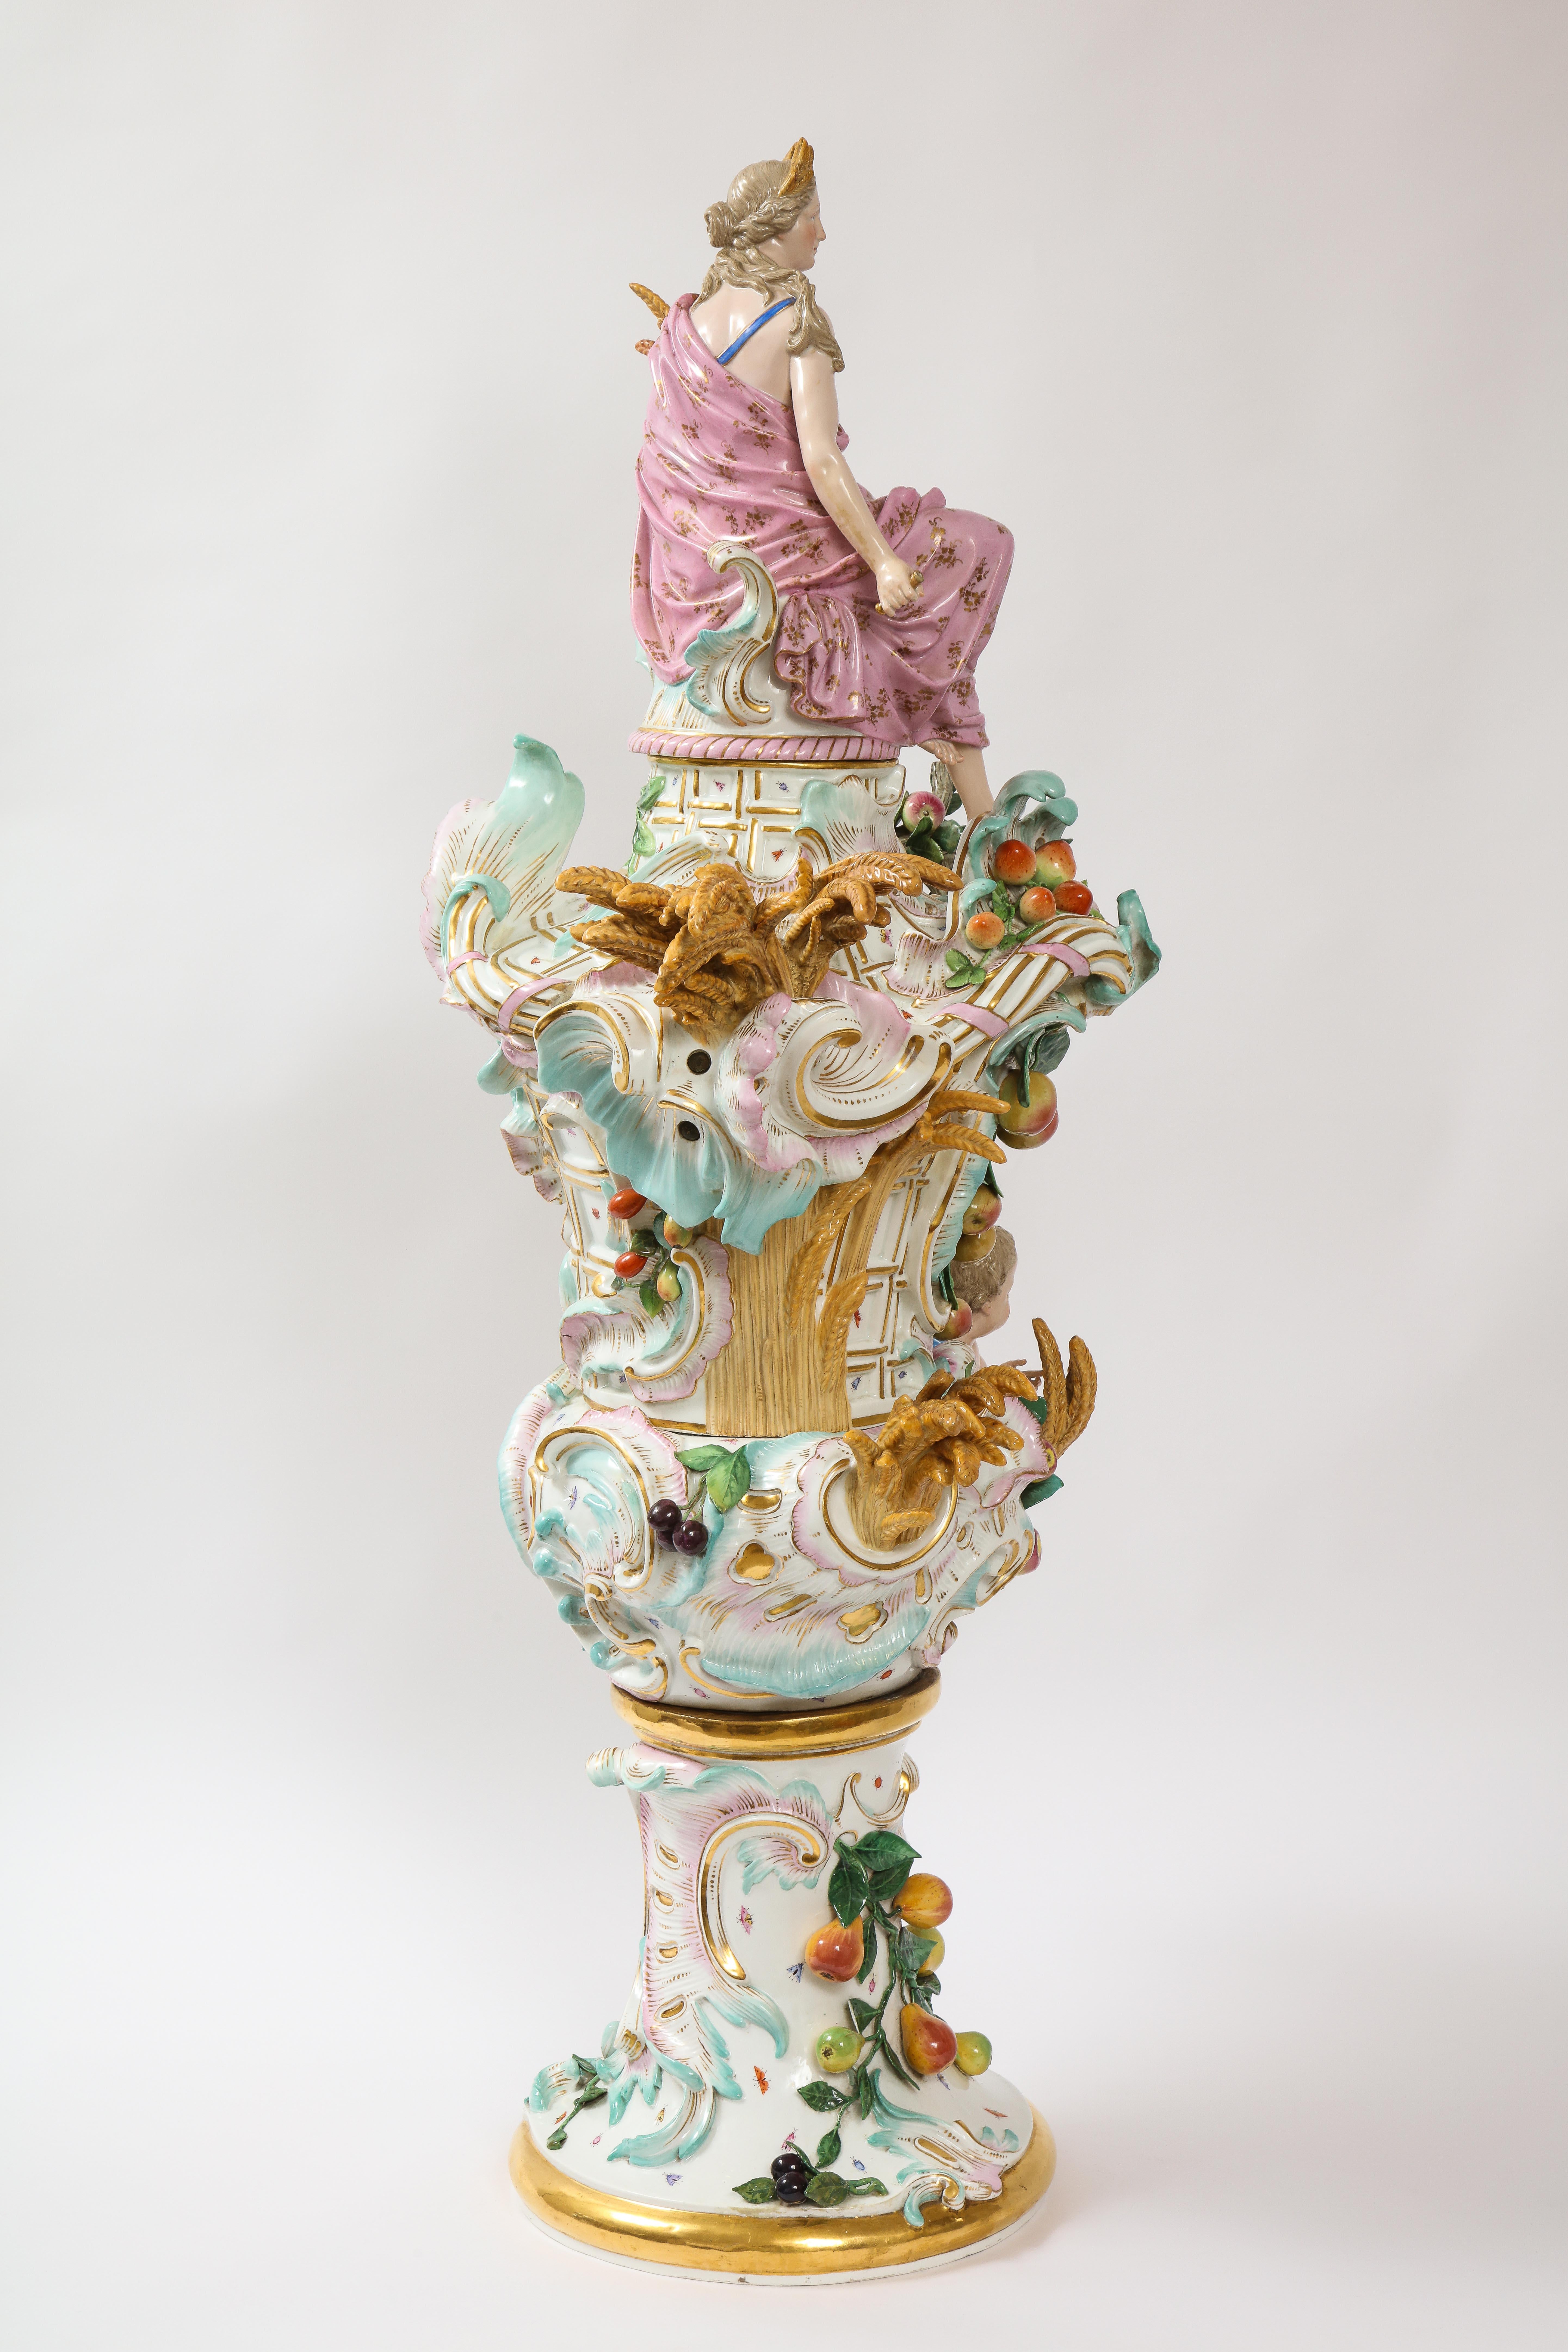 An incredible and truly monumental 19th century Meissen Porcelain Covered urn emblematic of autumn. This is one of the most incredible and spectacular displays of Meissen Porcelain we have had the pleasure of having in our collection of over 50,000